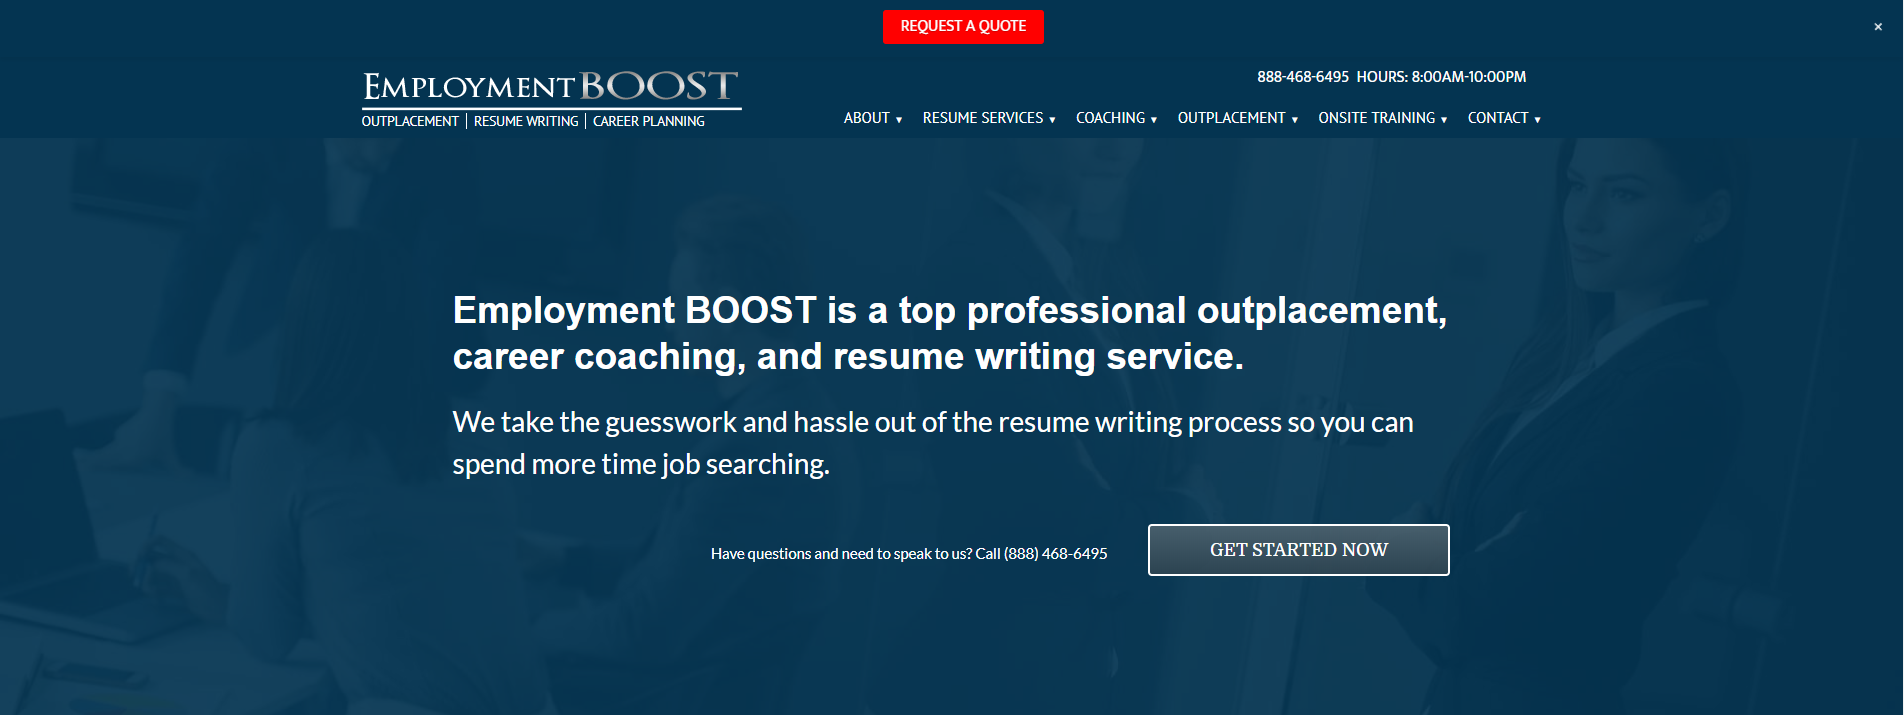 Best resume writing services chicago world